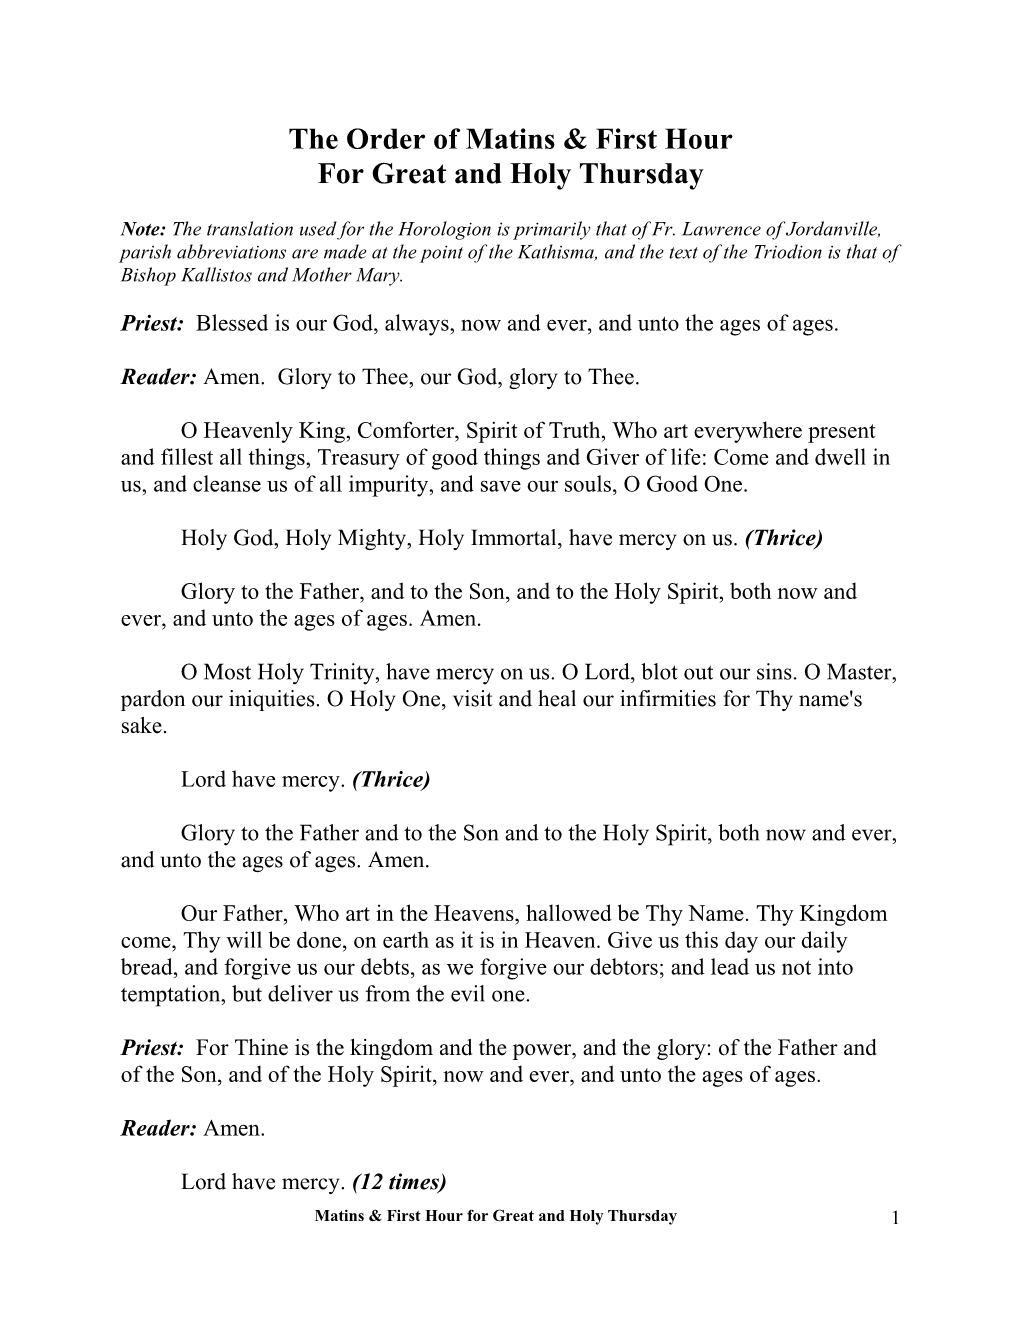 The Order of Matins & First Hour